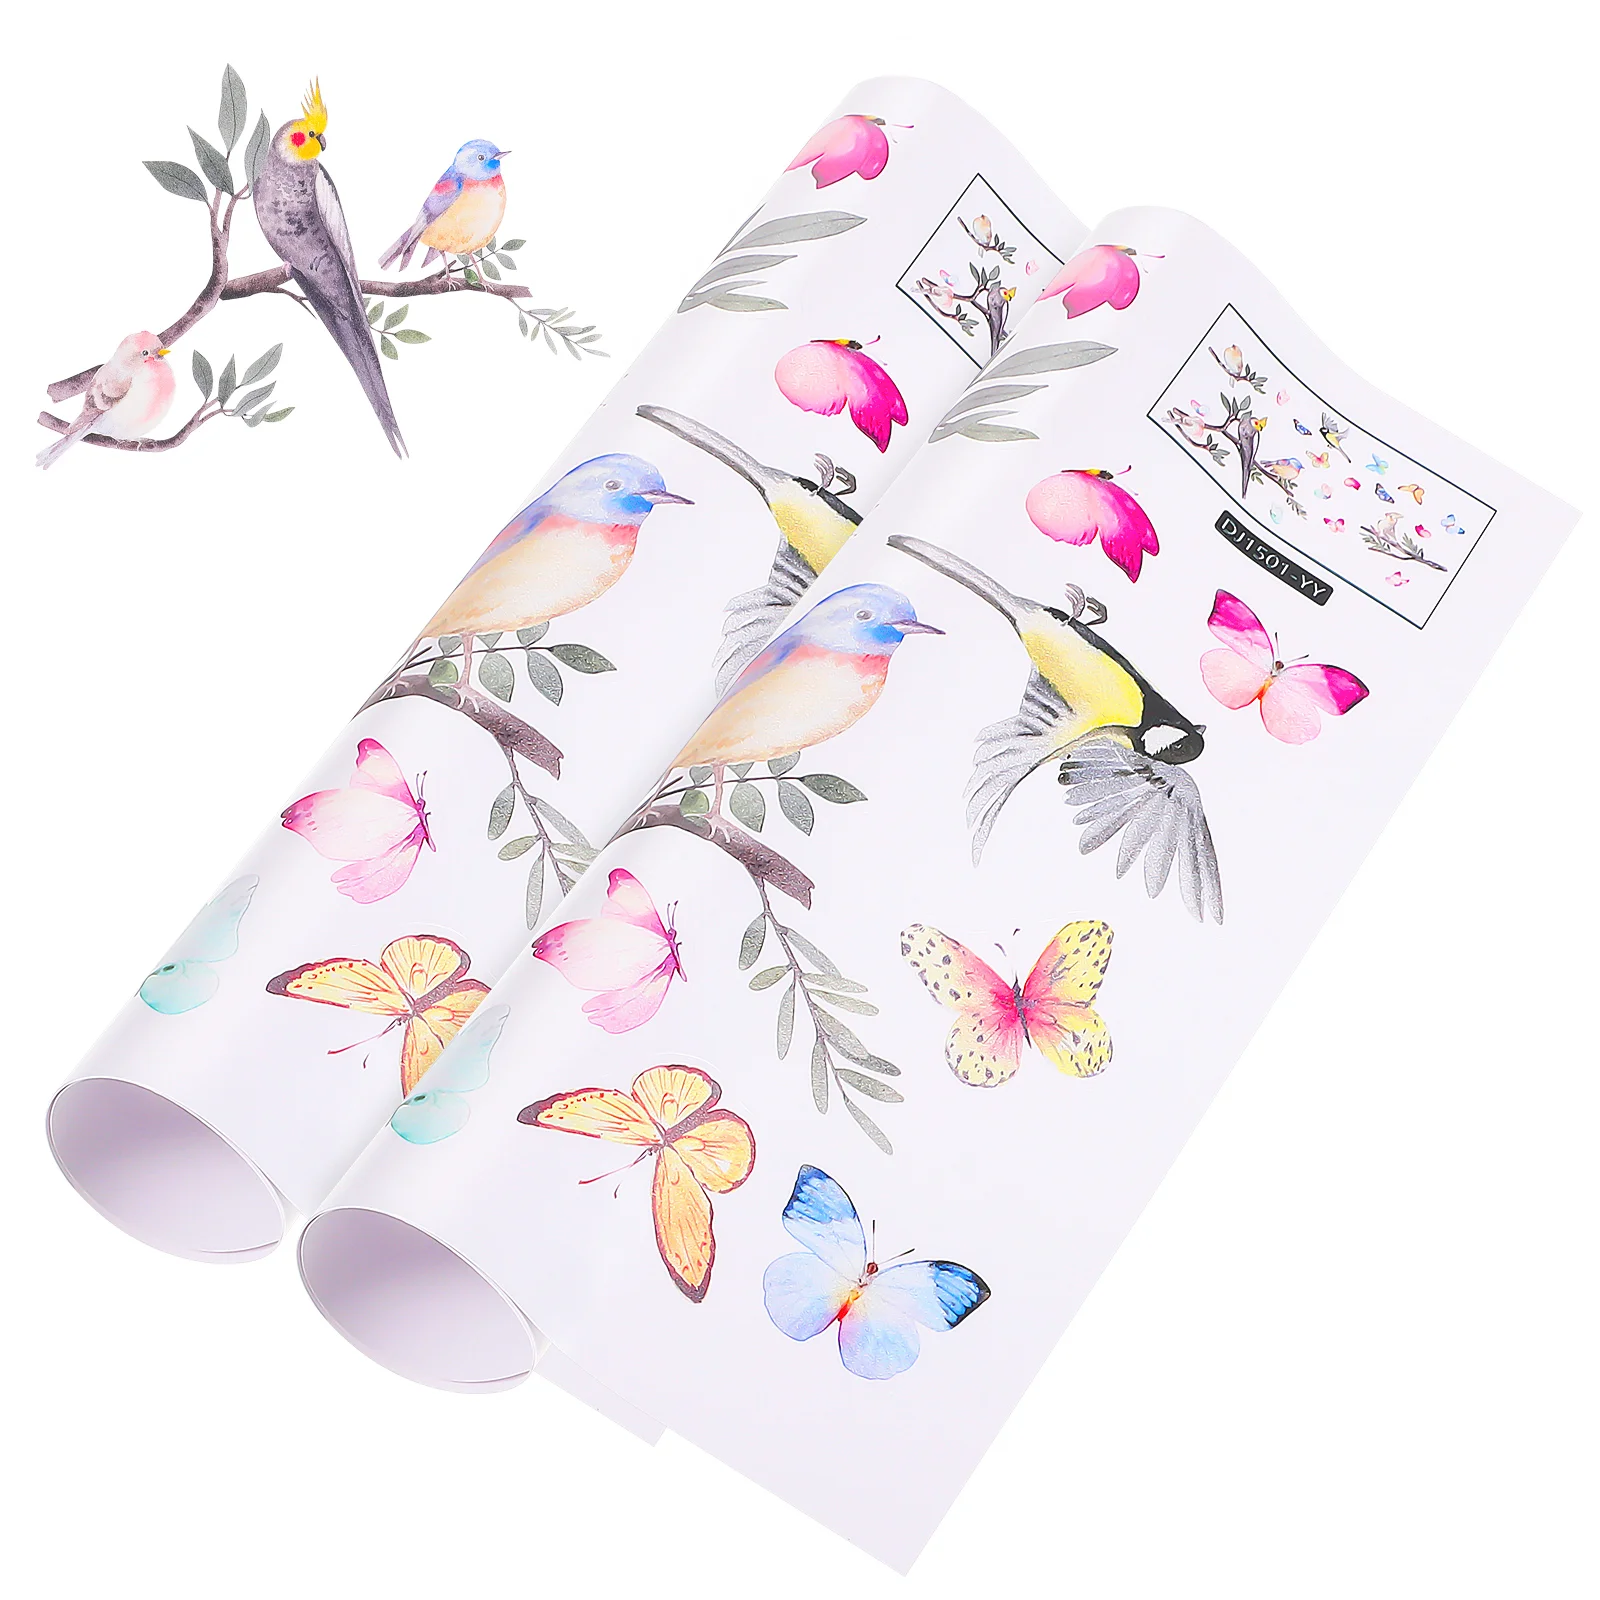 

Window Bird Wallpaper Clings Stickers Decals Wall Watercolor Collision Anti Paper Peel Stick Chinese Spring Birds Cling Alert